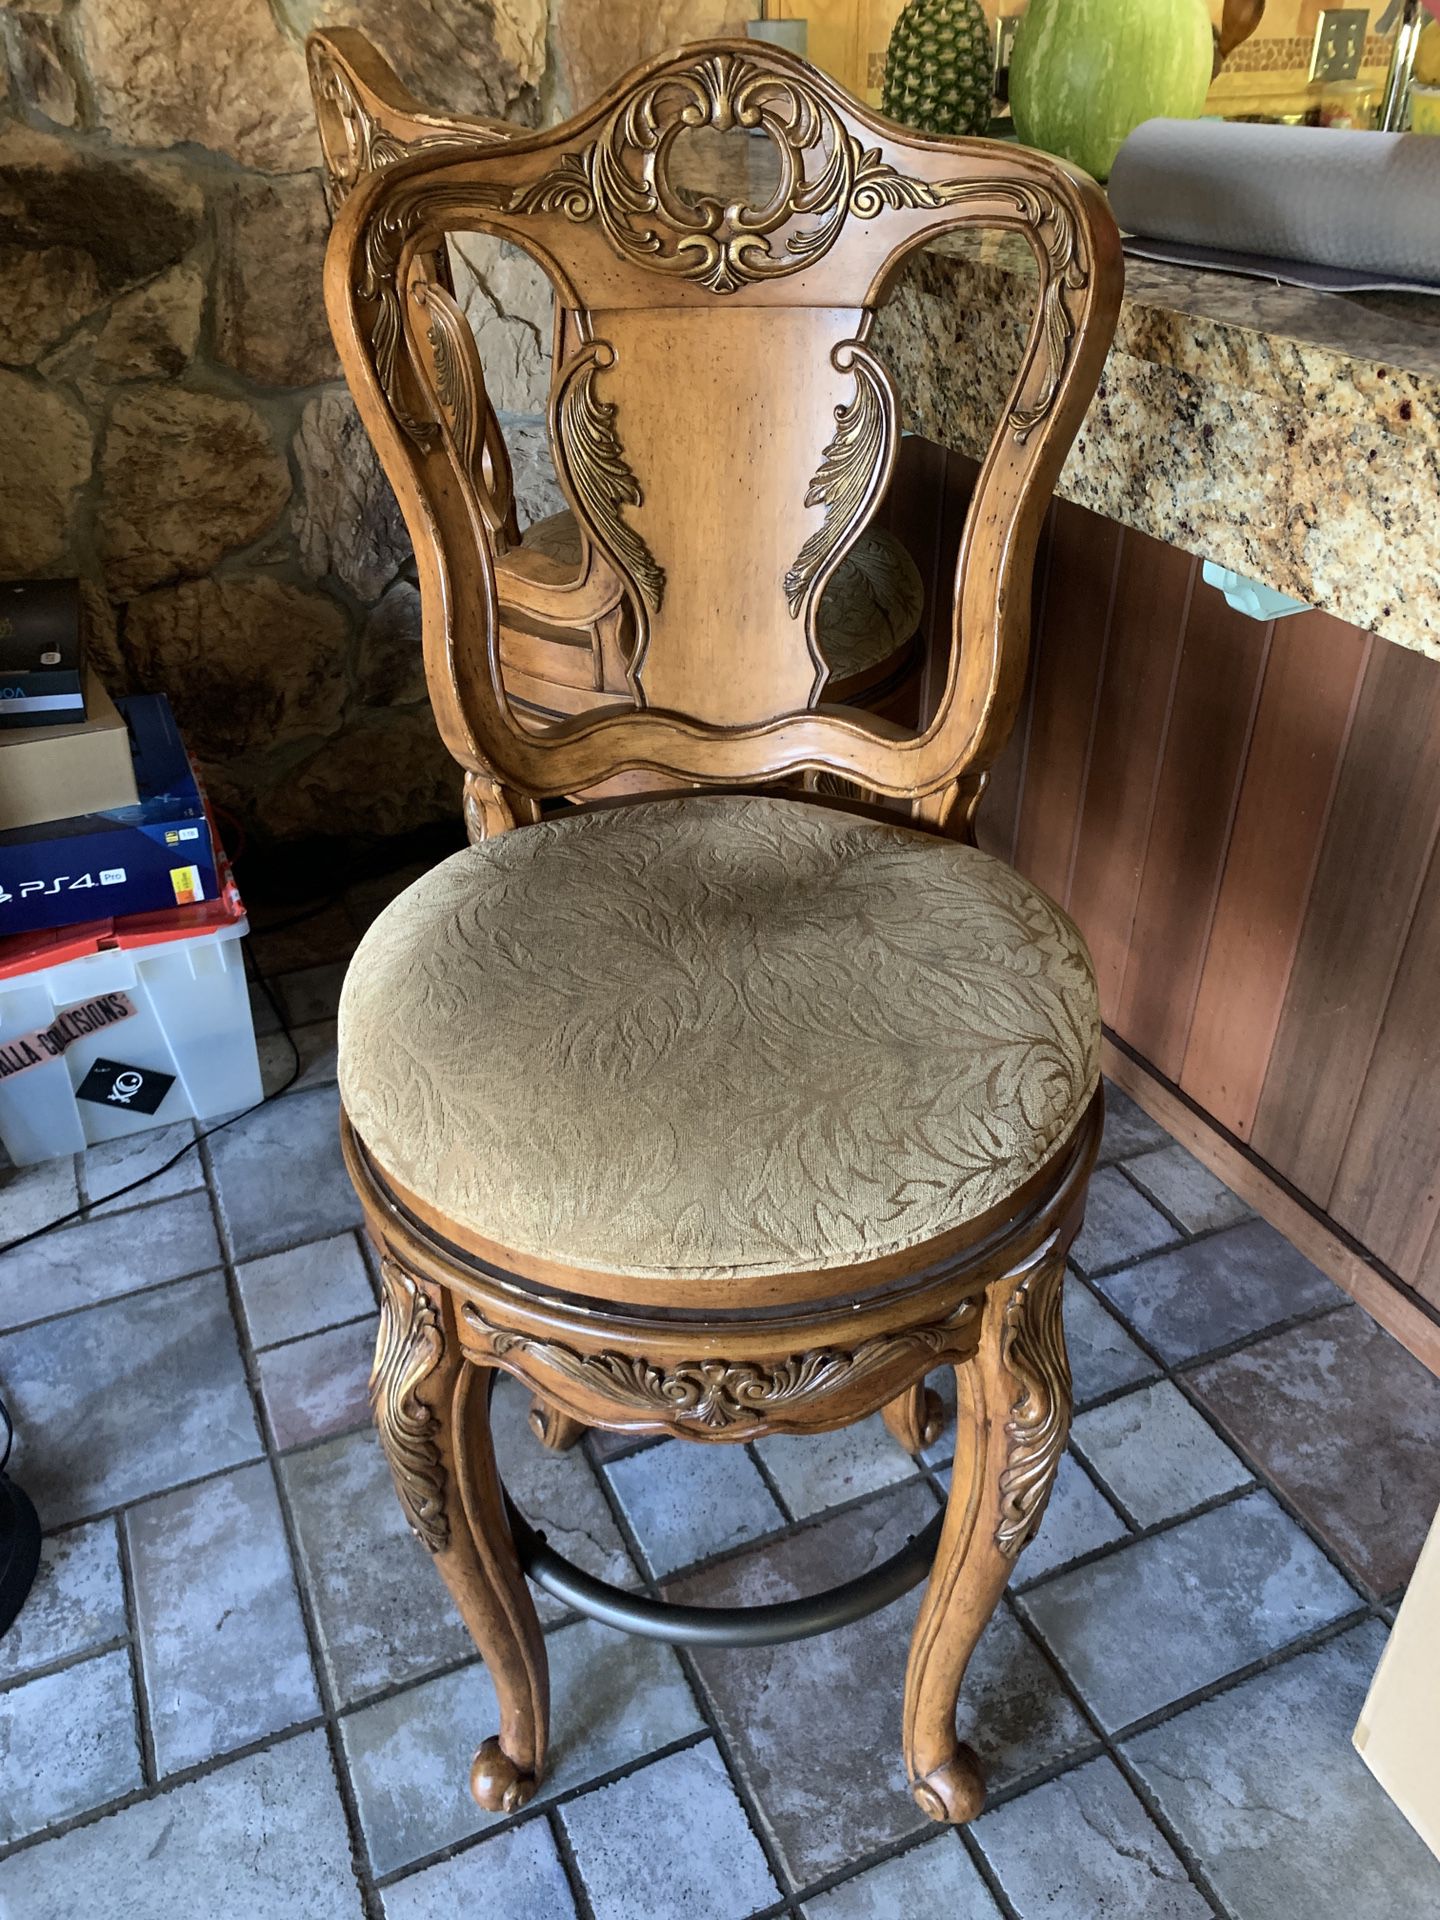 Vintage Antique Bar Stools / Chairs